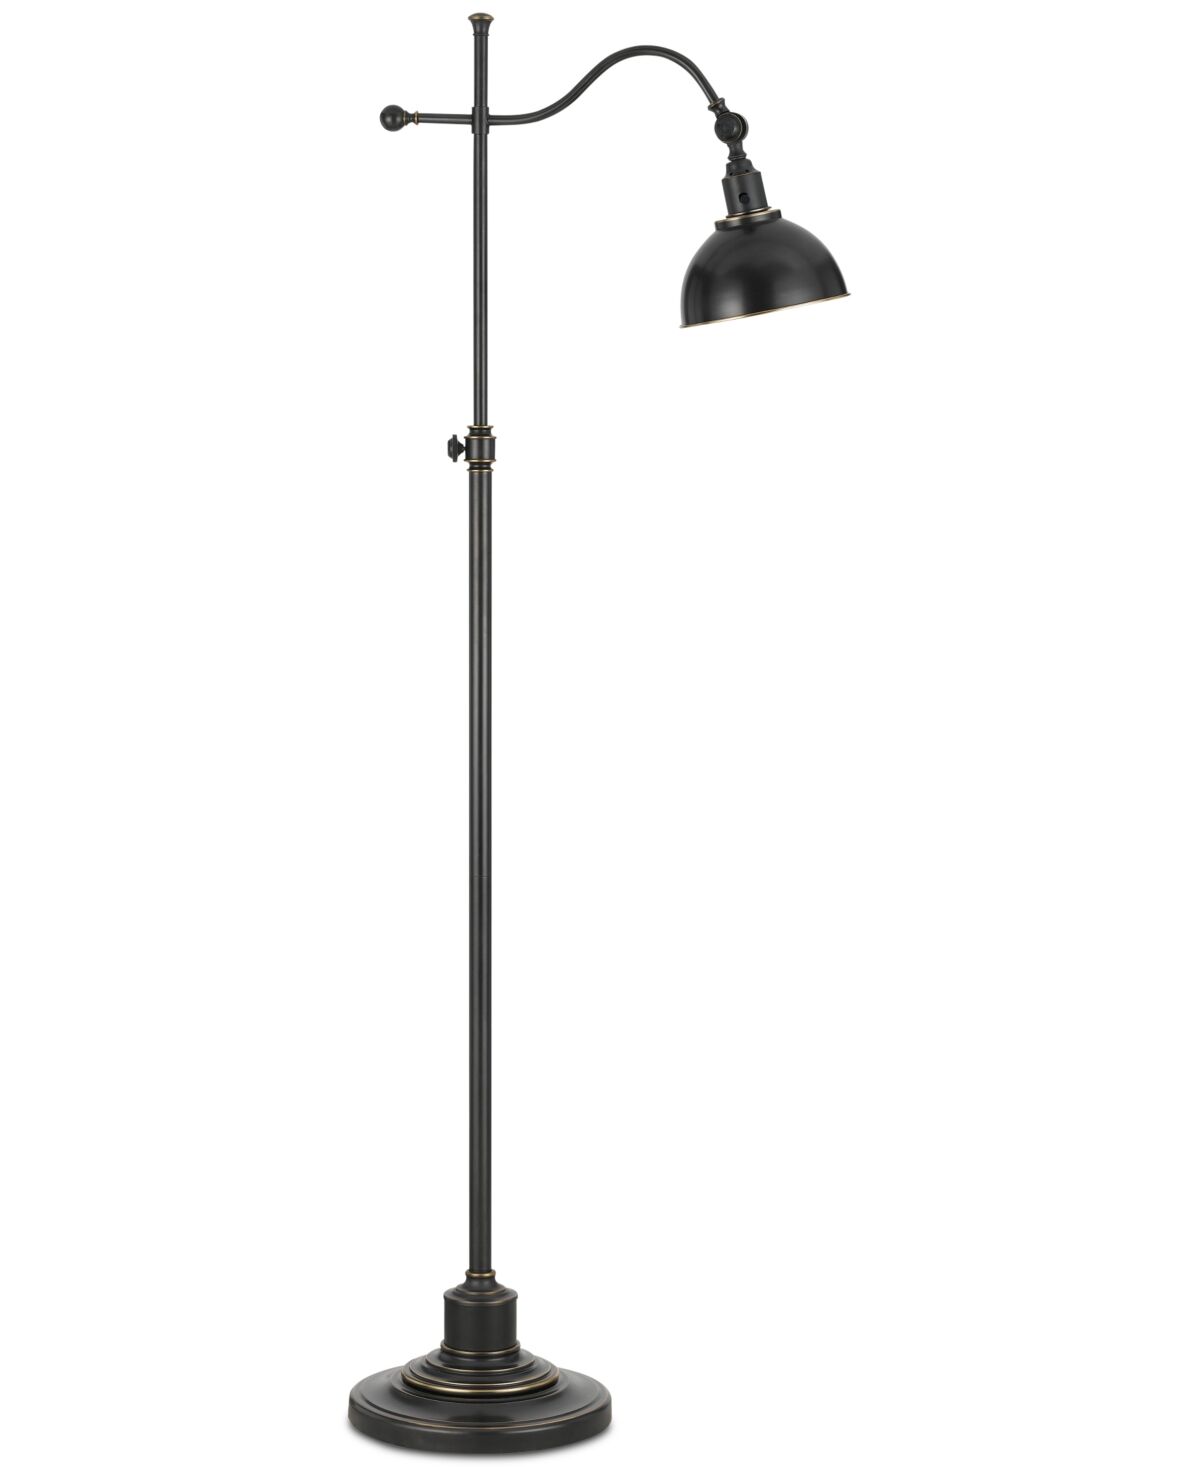 Cal Lighting Floor Lamp with Adjustable Pole - Oil Rubbed